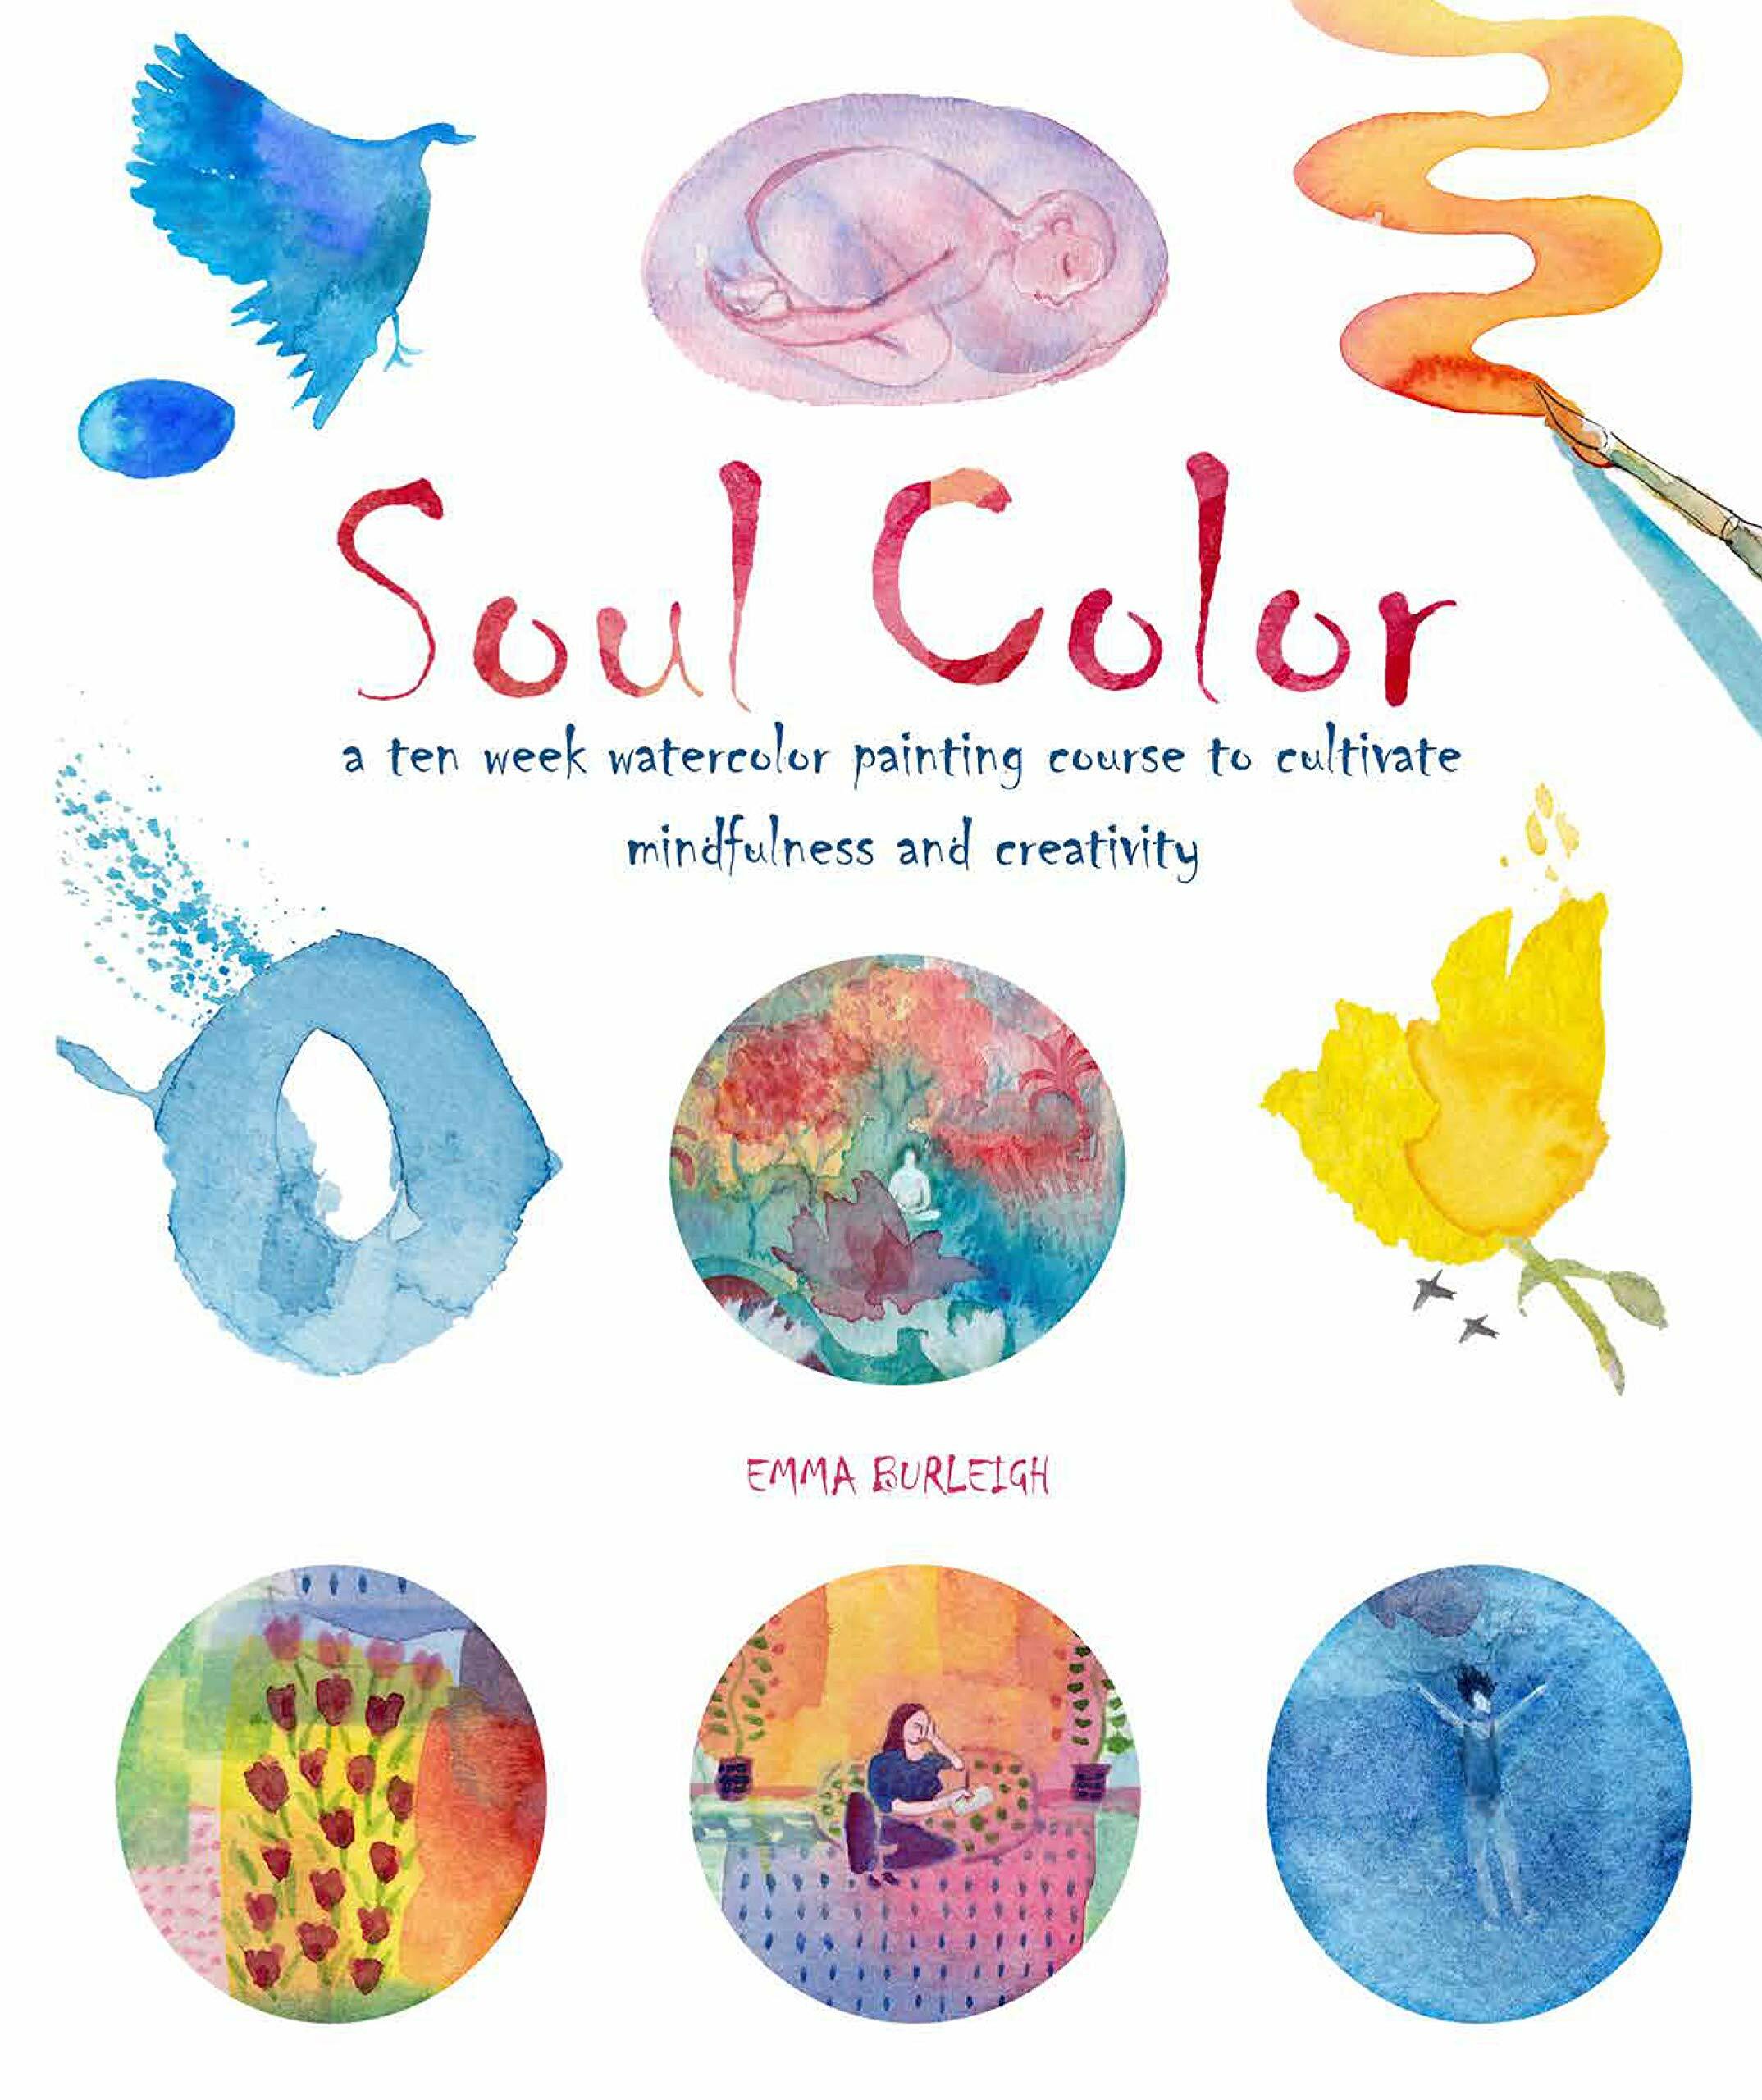 Soul Color : A Ten Week Watercolor Painting Course to Cultivate Mindfulness and Creativity (Paperback)